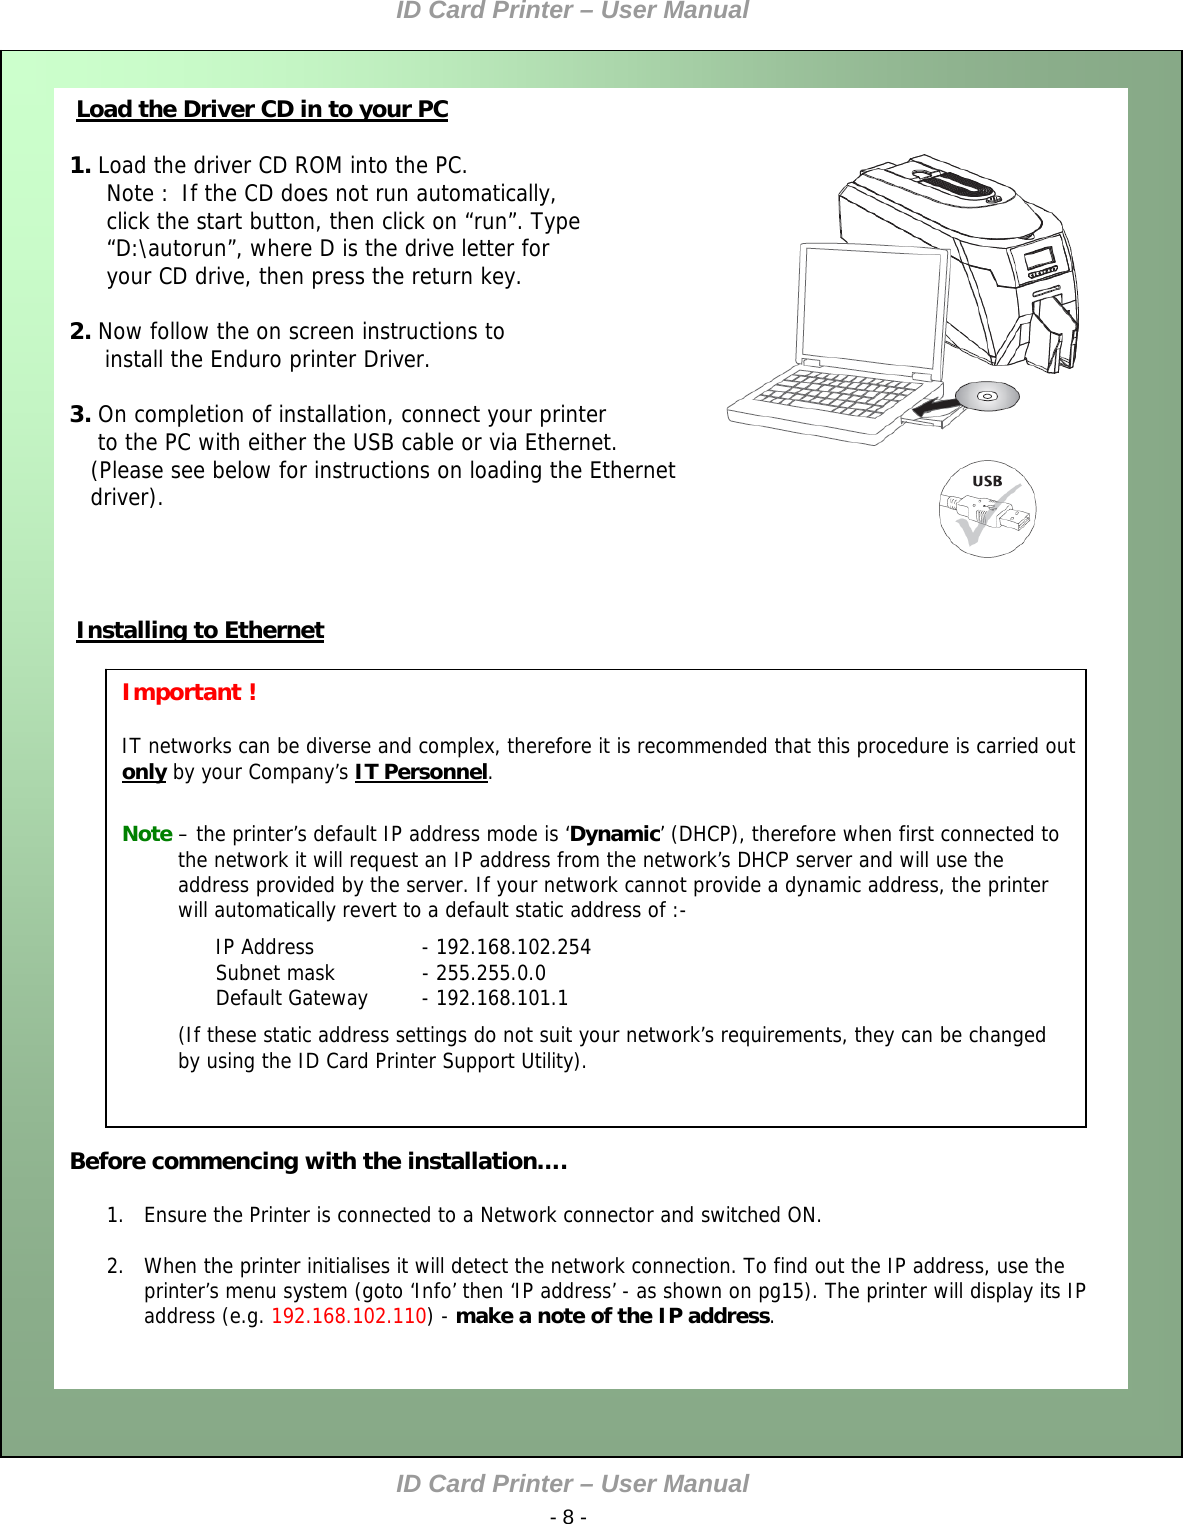 ID Card Printer – User Manual ID Card Printer – User Manual  - 8 -    1. Load the driver CD ROM into the PC. Note :  If the CD does not run automatically, click the start button, then click on “run”. Type “D:\autorun”, where D is the drive letter for your CD drive, then press the return key.  2. Now follow the on screen instructions to      install the Enduro printer Driver.  Load the Driver CD in to your PC  3. On completion of installation, connect your printer     to the PC with either the USB cable or via Ethernet.    (Please see below for instructions on loading the Ethernet     driver).                         Before commencing with the installation….  1. Ensure the Printer is connected to a Network connector and switched ON.  2. When the printer initialises it will detect the network connection. To find out the IP address, use the printer’s menu system (goto ‘Info’ then ‘IP address’ - as shown on pg15). The printer will display its IP address (e.g. 192.168.102.110) - make a note of the IP address.          Installing to Ethernet IP Address     - 192.168.102.254 Subnet mask     - 255.255.0.0 Default Gateway  - 192.168.101.1 (If these static address settings do not suit your network’s requirements, they can be changed by using the ID Card Printer Support Utility).   Note – the printer’s default IP address mode is ‘Dynamic’ (DHCP), therefore when first connected to the network it will request an IP address from the network’s DHCP server and will use the address provided by the server. If your network cannot provide a dynamic address, the printer will automatically revert to a default static address of :- Important !  IT networks can be diverse and complex, therefore it is recommended that this procedure is carried out only by your Company’s IT Personnel.                